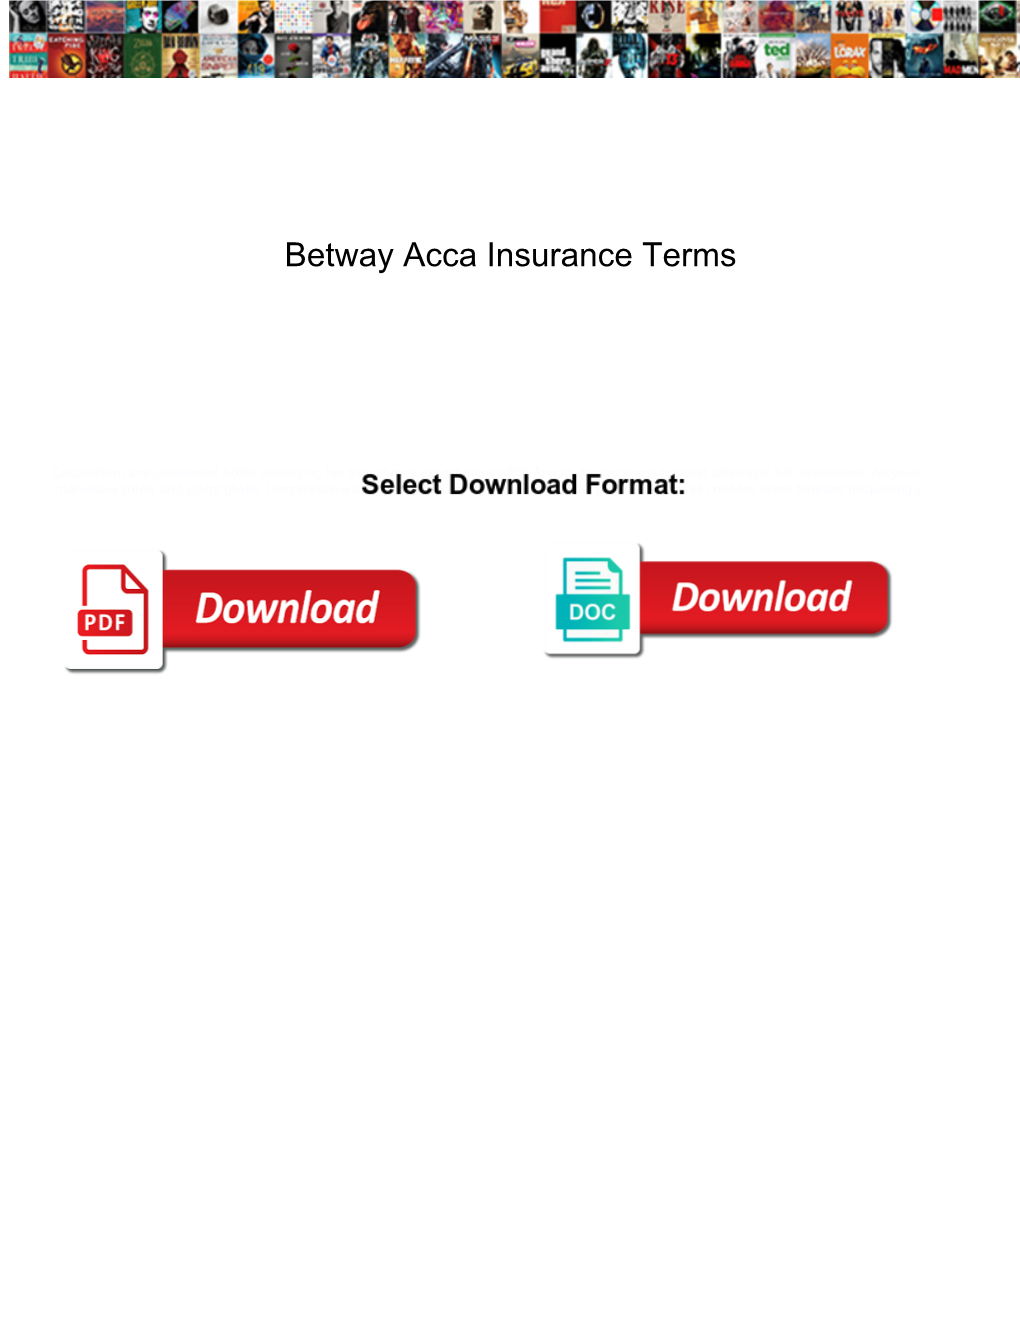 Betway Acca Insurance Terms